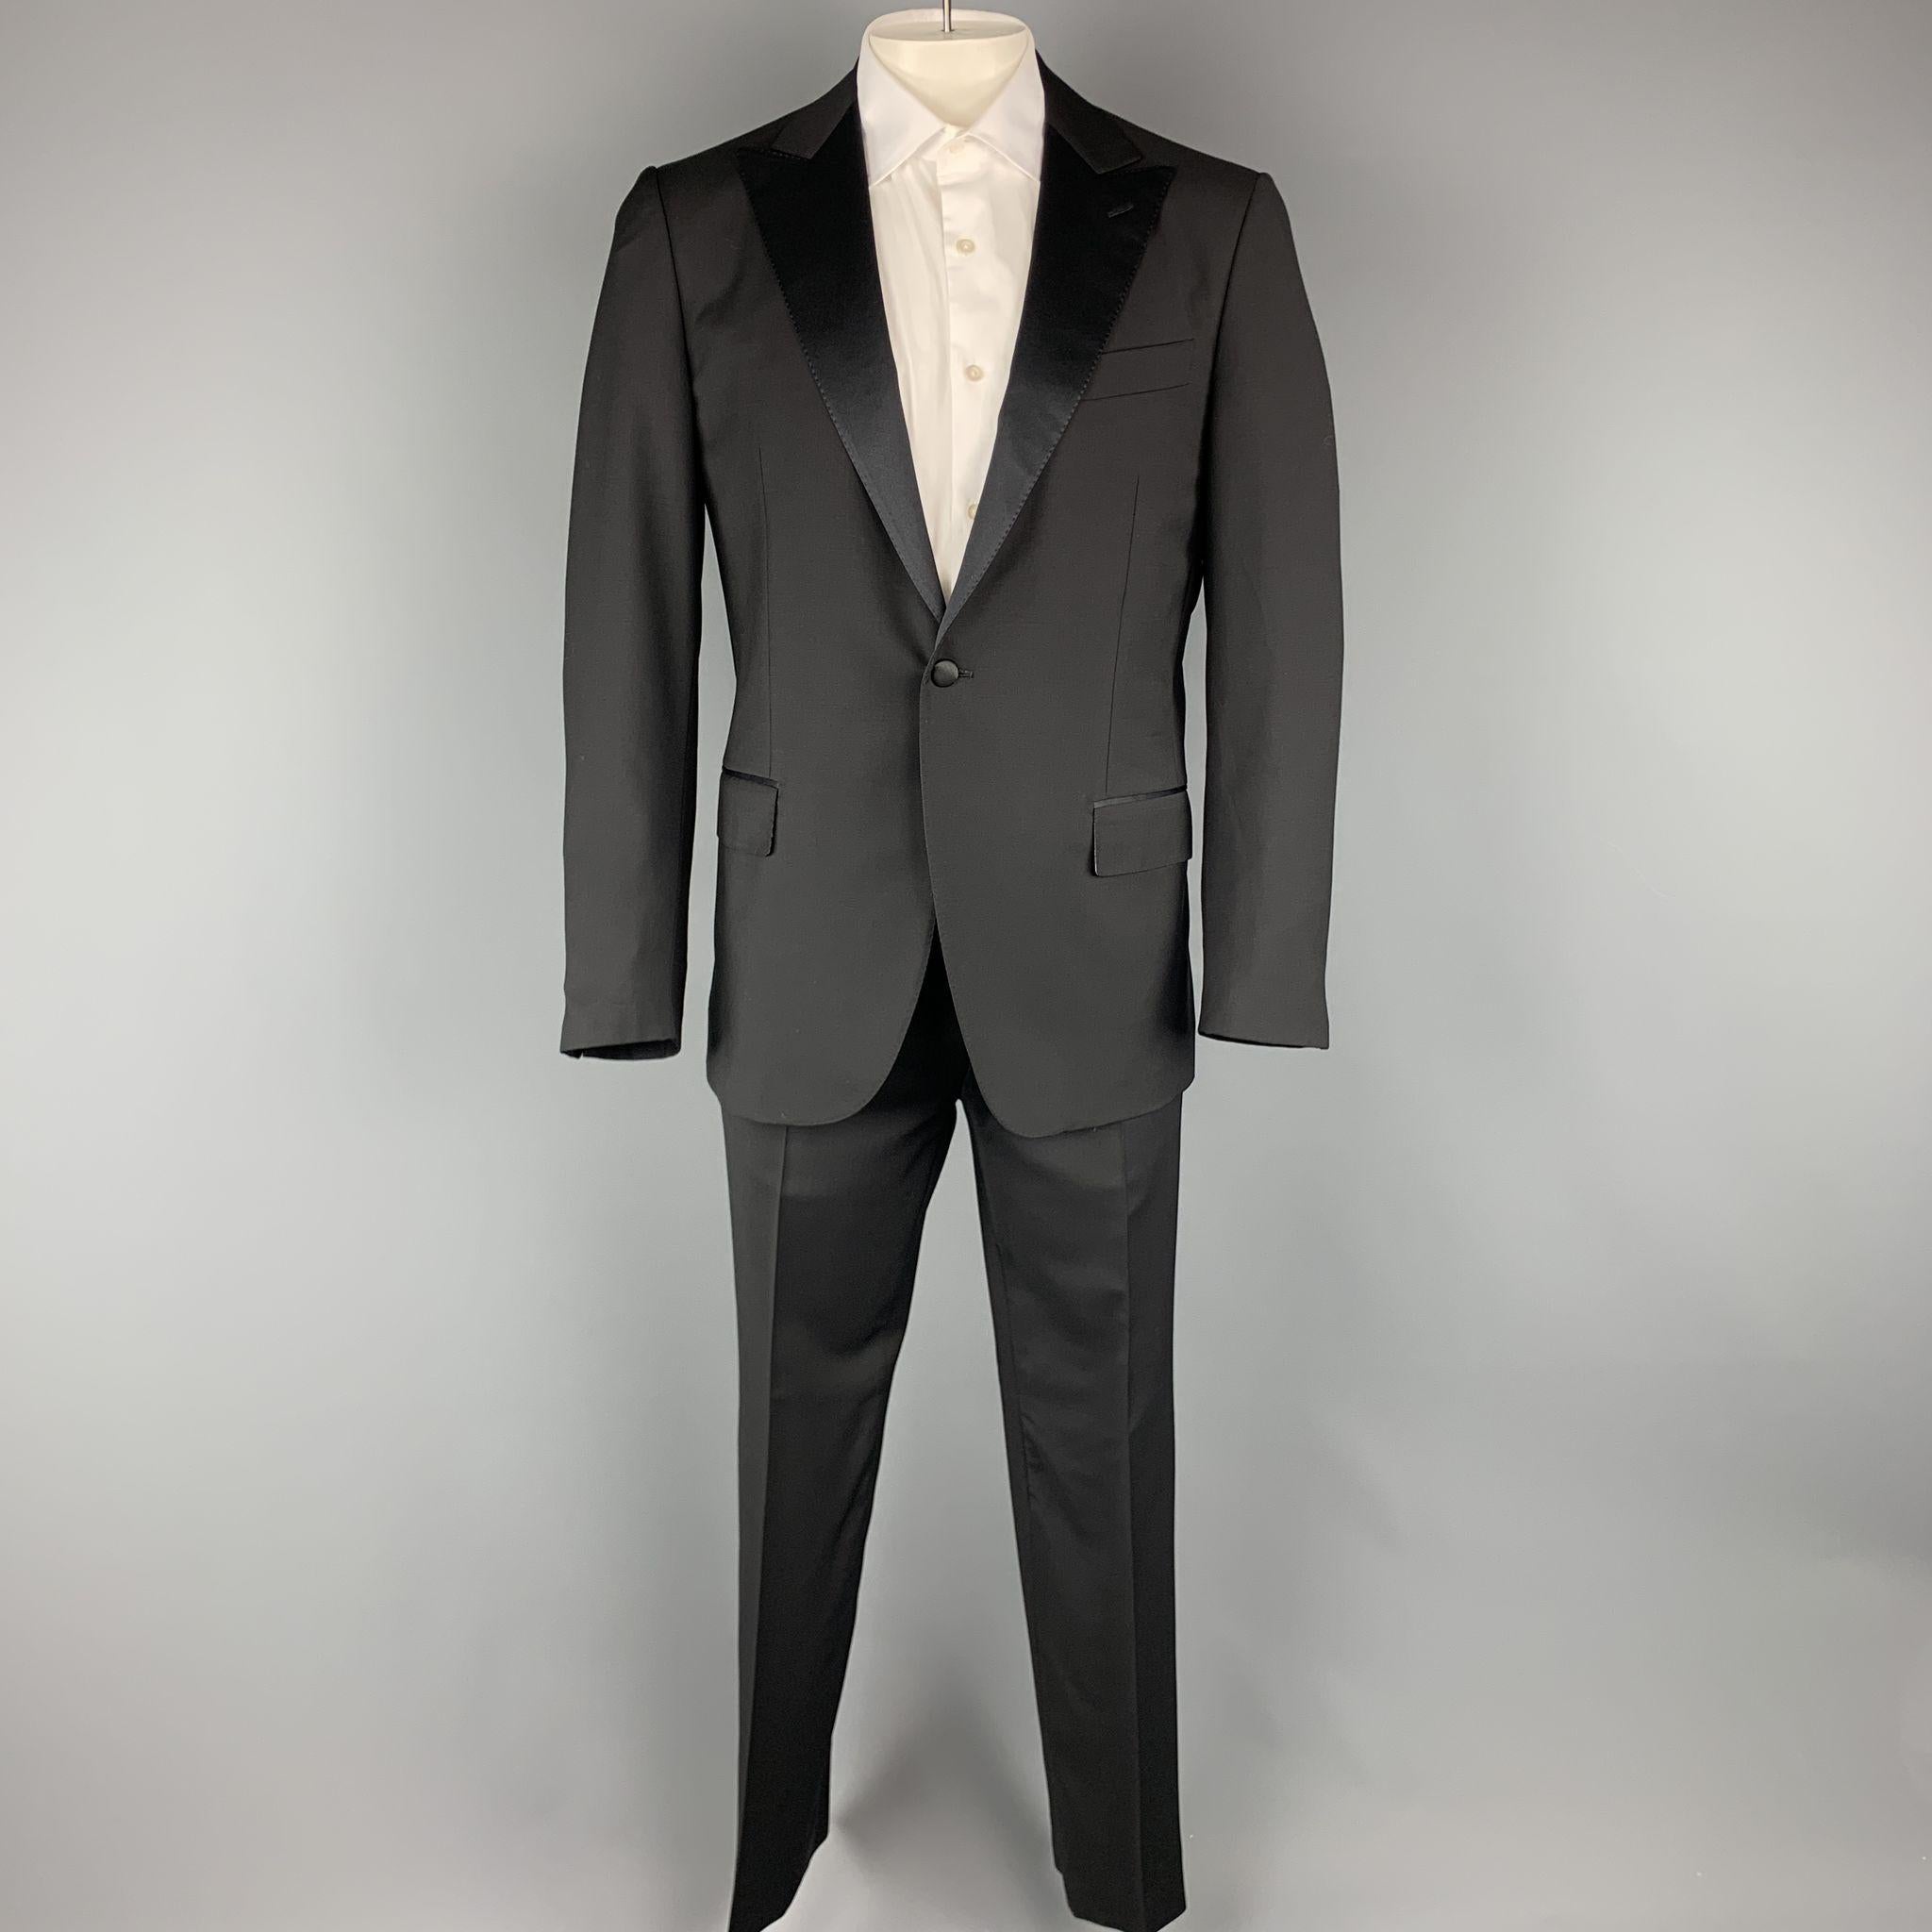 
CARUSO for NEIMAN MARCUS suit comes in a black wool and mohair and includes a single breasted,  single button sport coat with peak lapel and matching front trousers.
 
Excellent Pre-Owned Condition.
Marked: 52
 
Measurements:
 
-Jacket

   